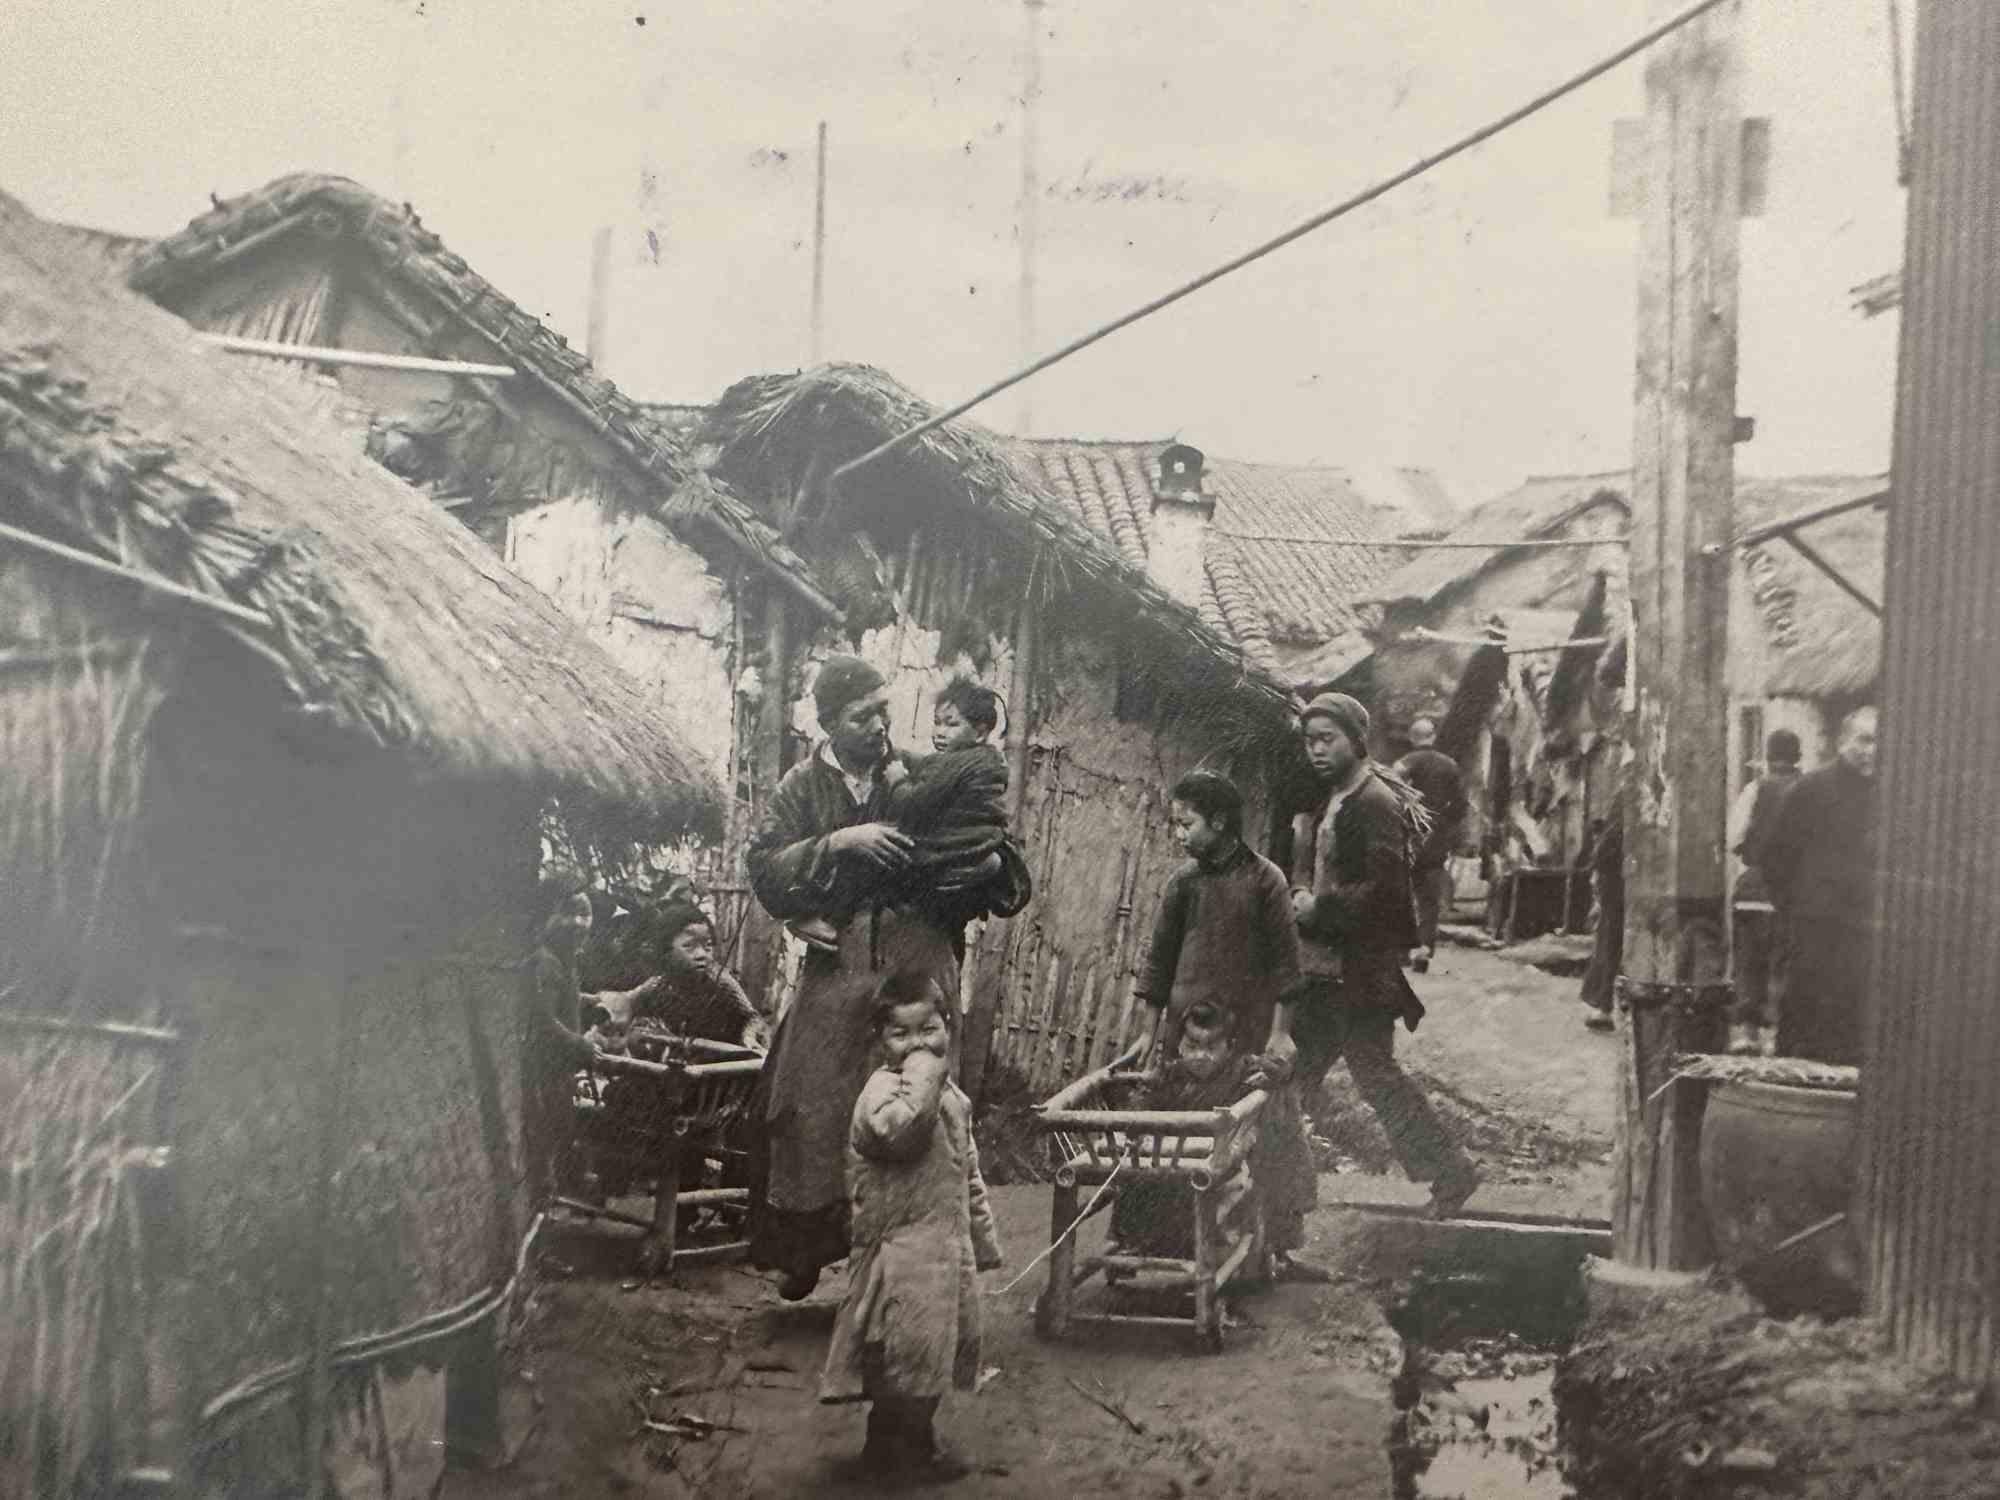 Unknown Figurative Photograph - Historical Photo - Chinese Village - Early 20th Century